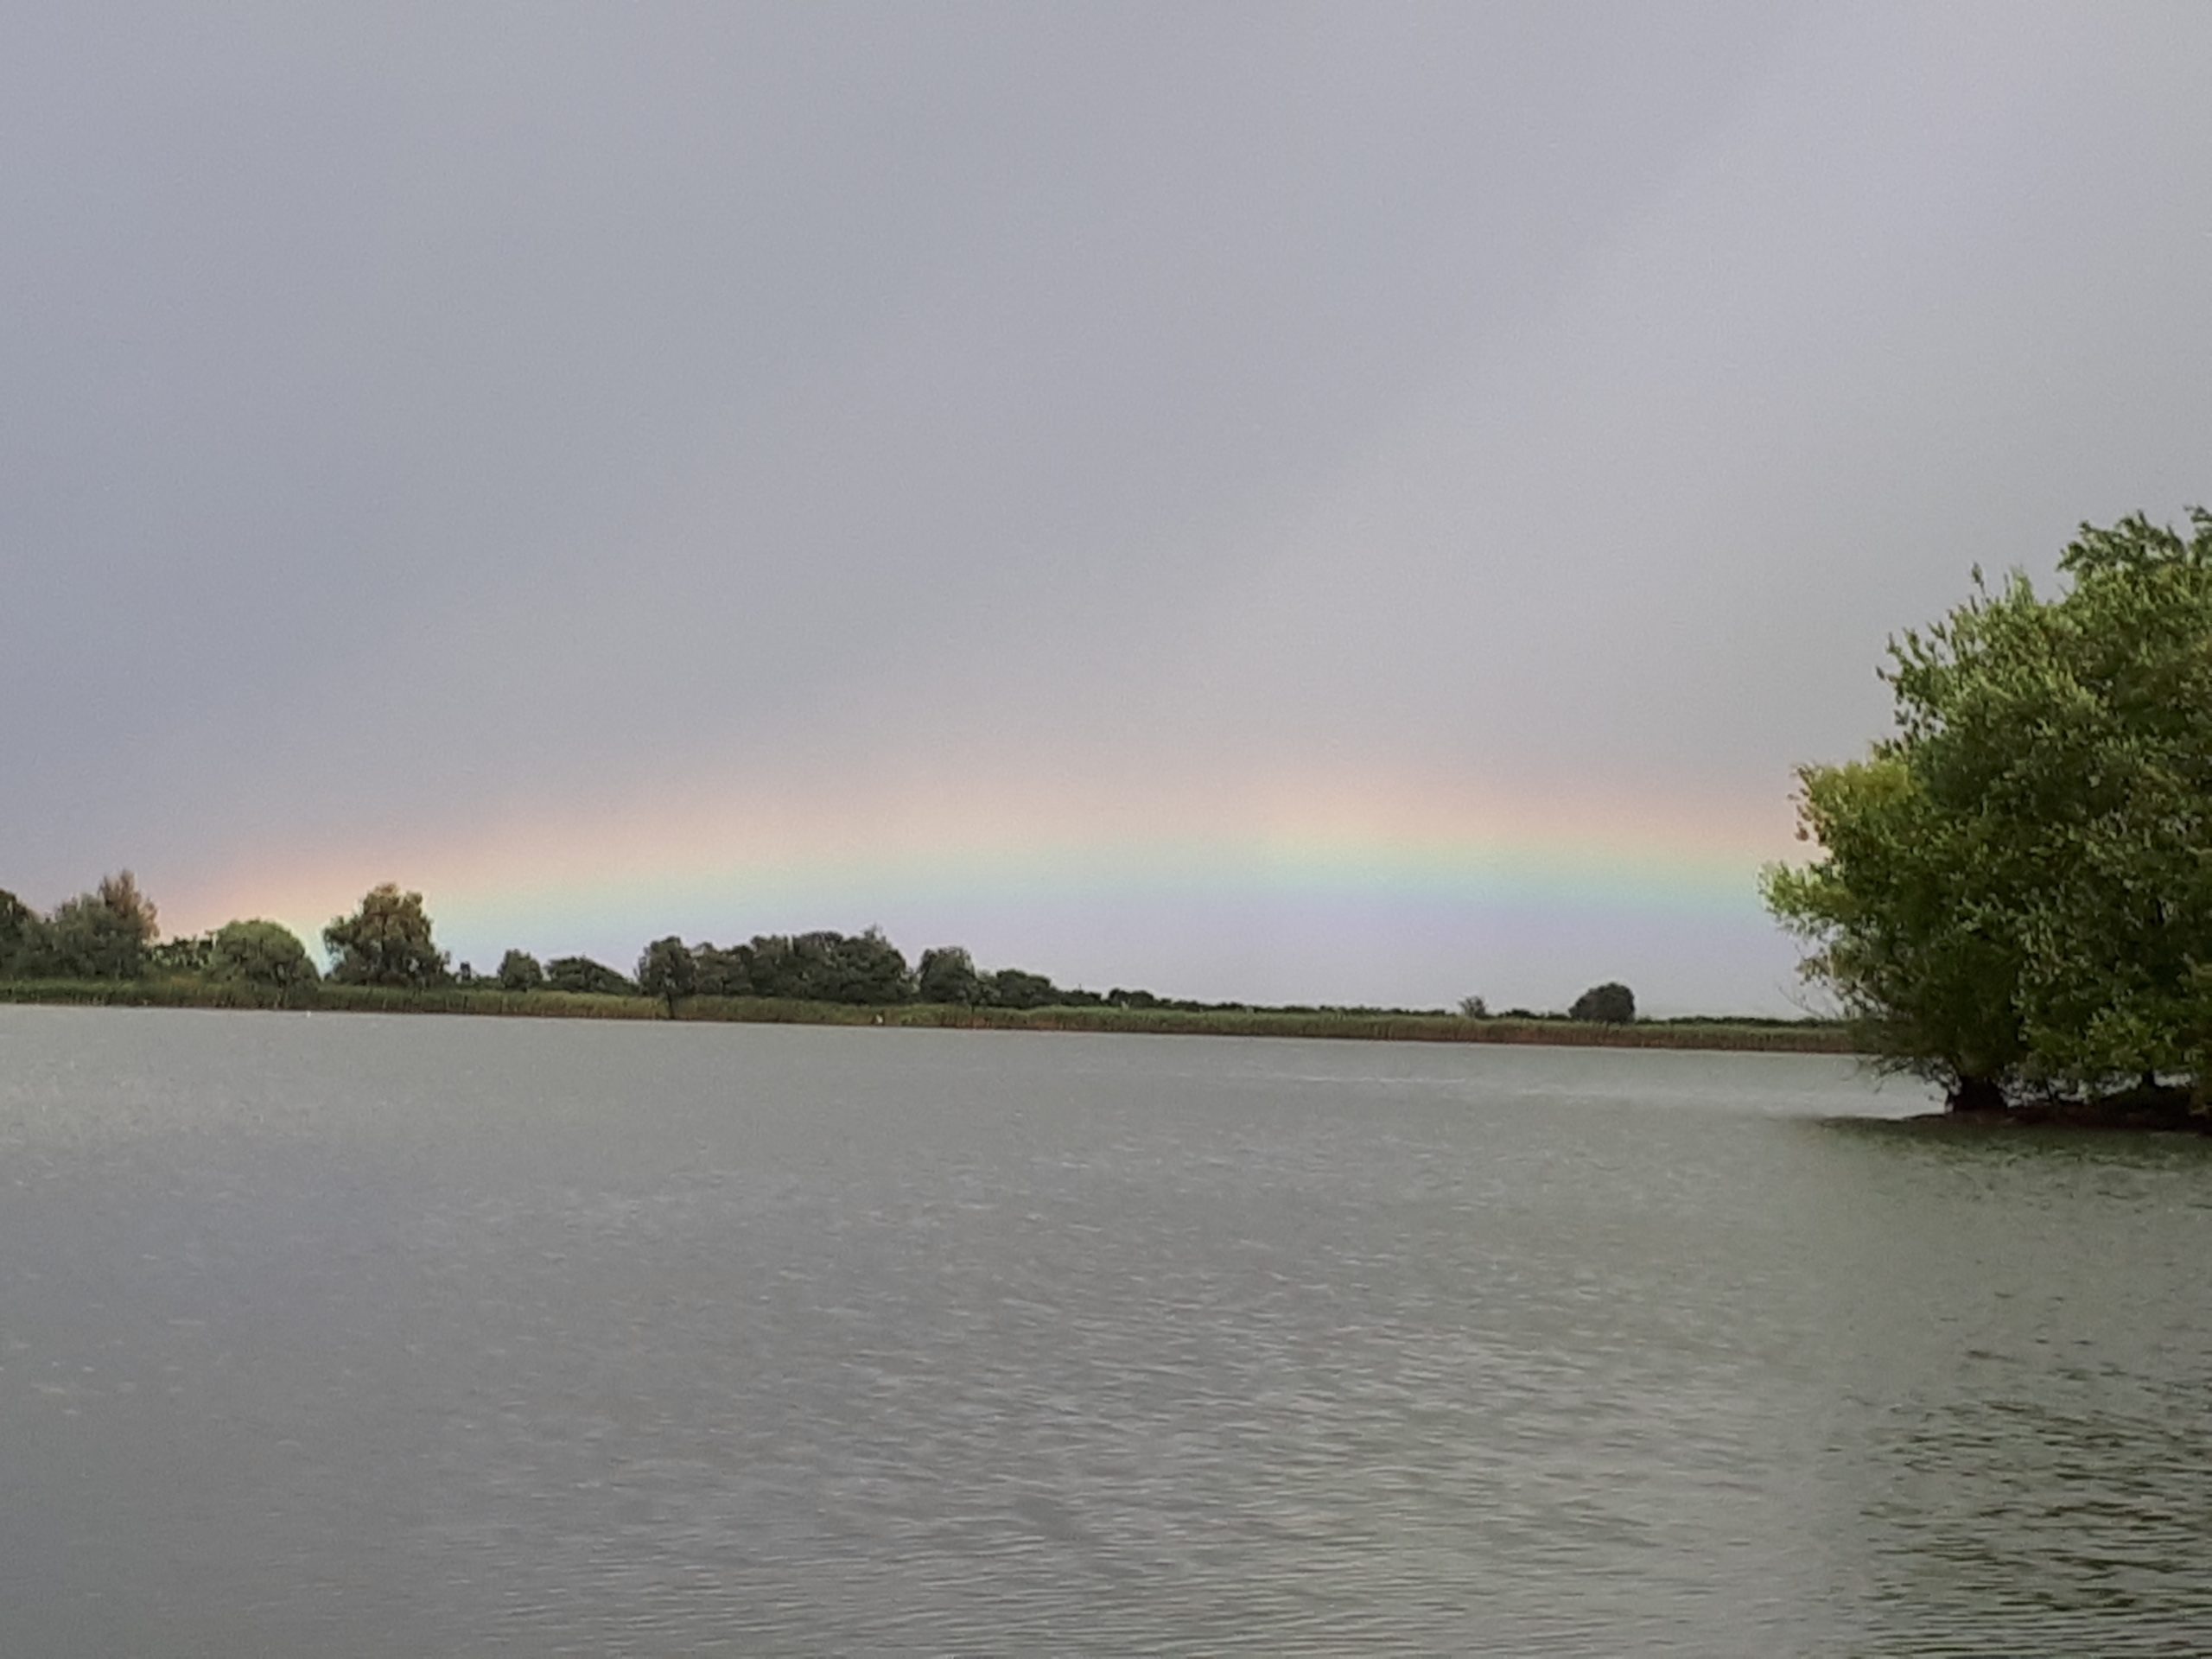 I was just setting out to place the marker buoys when I noticed the rainbow.  Unusually low in the sky.